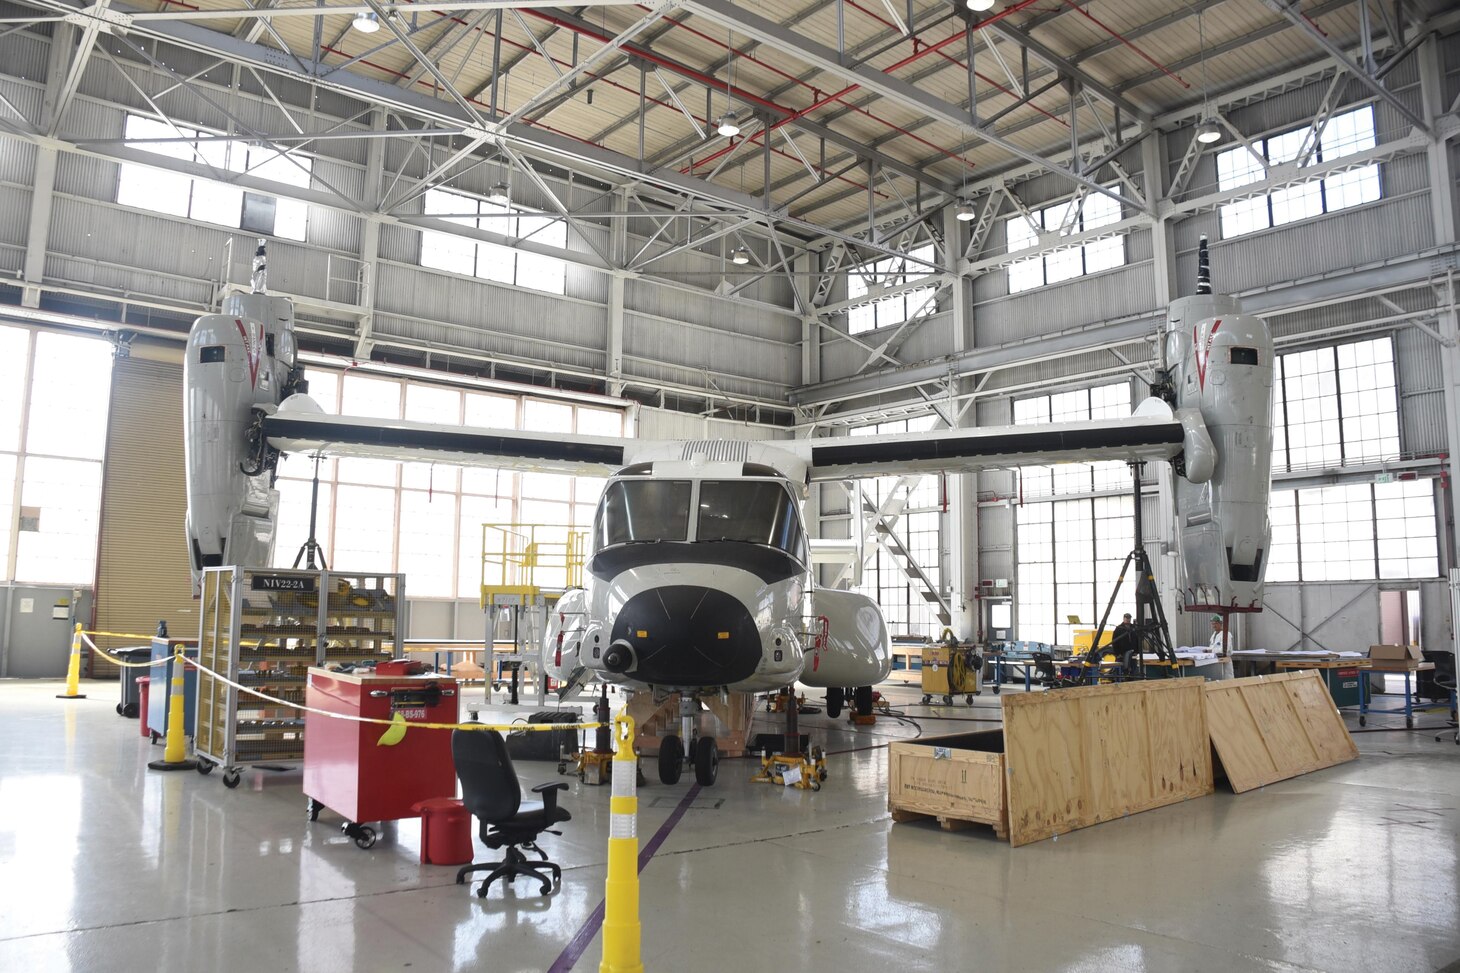 The VRM-30 CMV-22 Osprey inducted by FRCSW on Jan. 13 is pictured in Building 333. The inner composite skin of the aircraft suffered a 4-foot-by-2-foot crack during a mishap. FRCSW, FST, the V-22 program office and industry partners developed a repair plan to return the aircraft to its squadron.